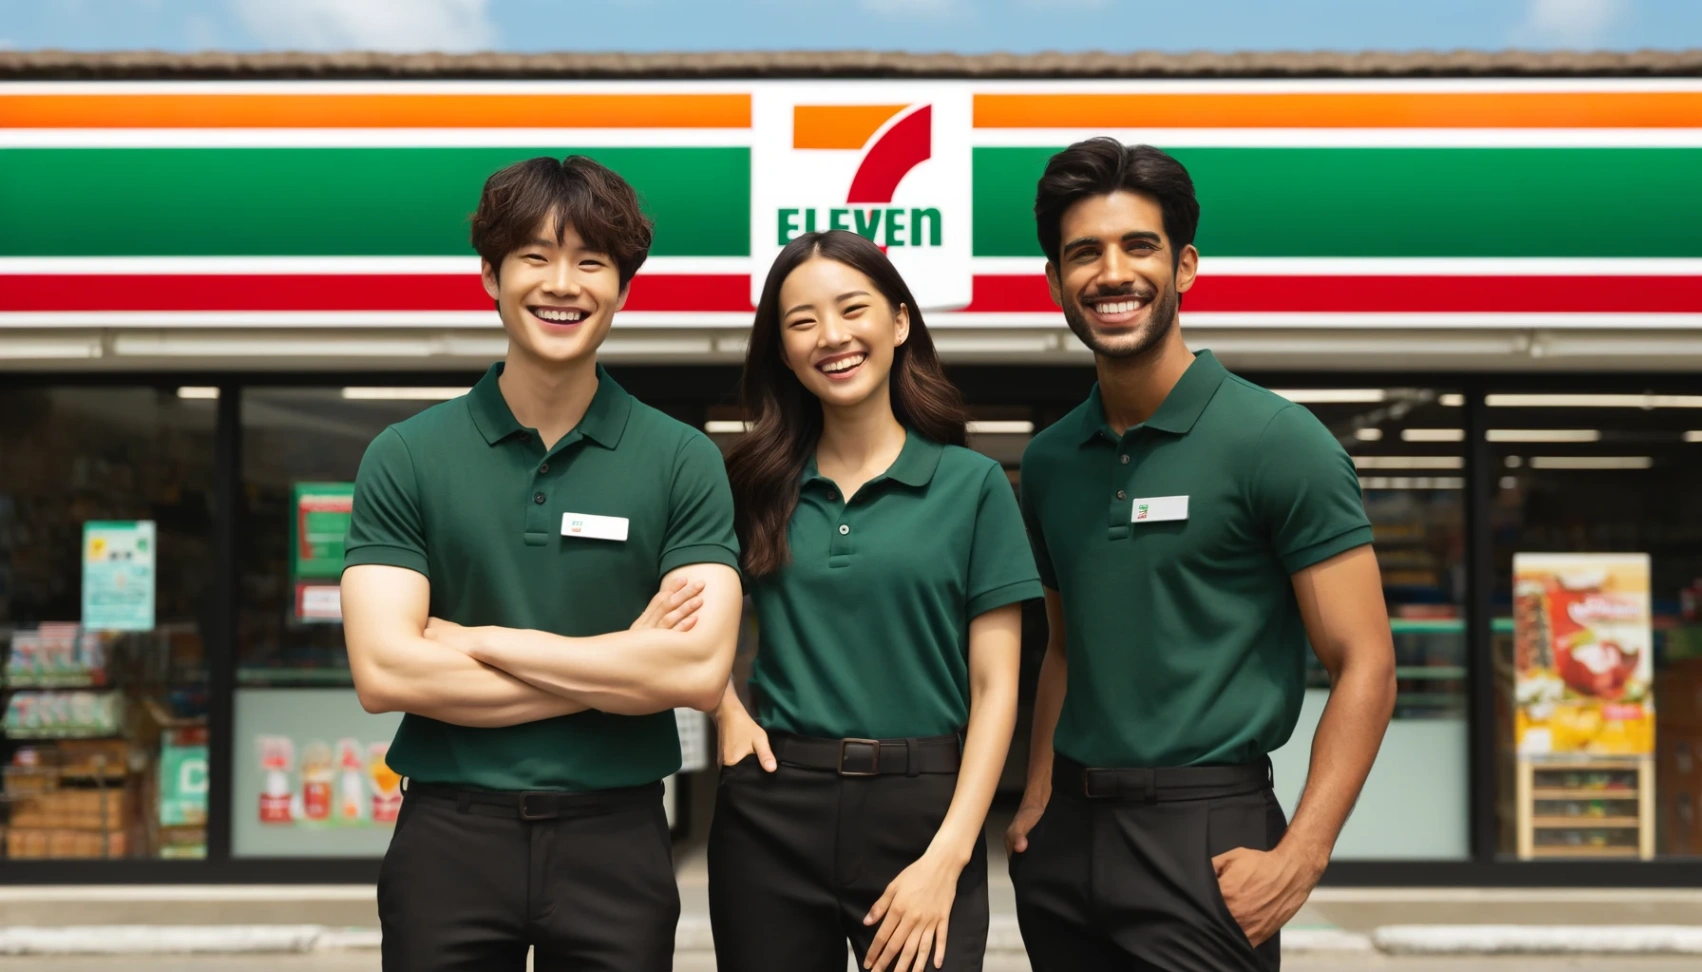 7-Eleven Job Openings and Application Process - How to Apply